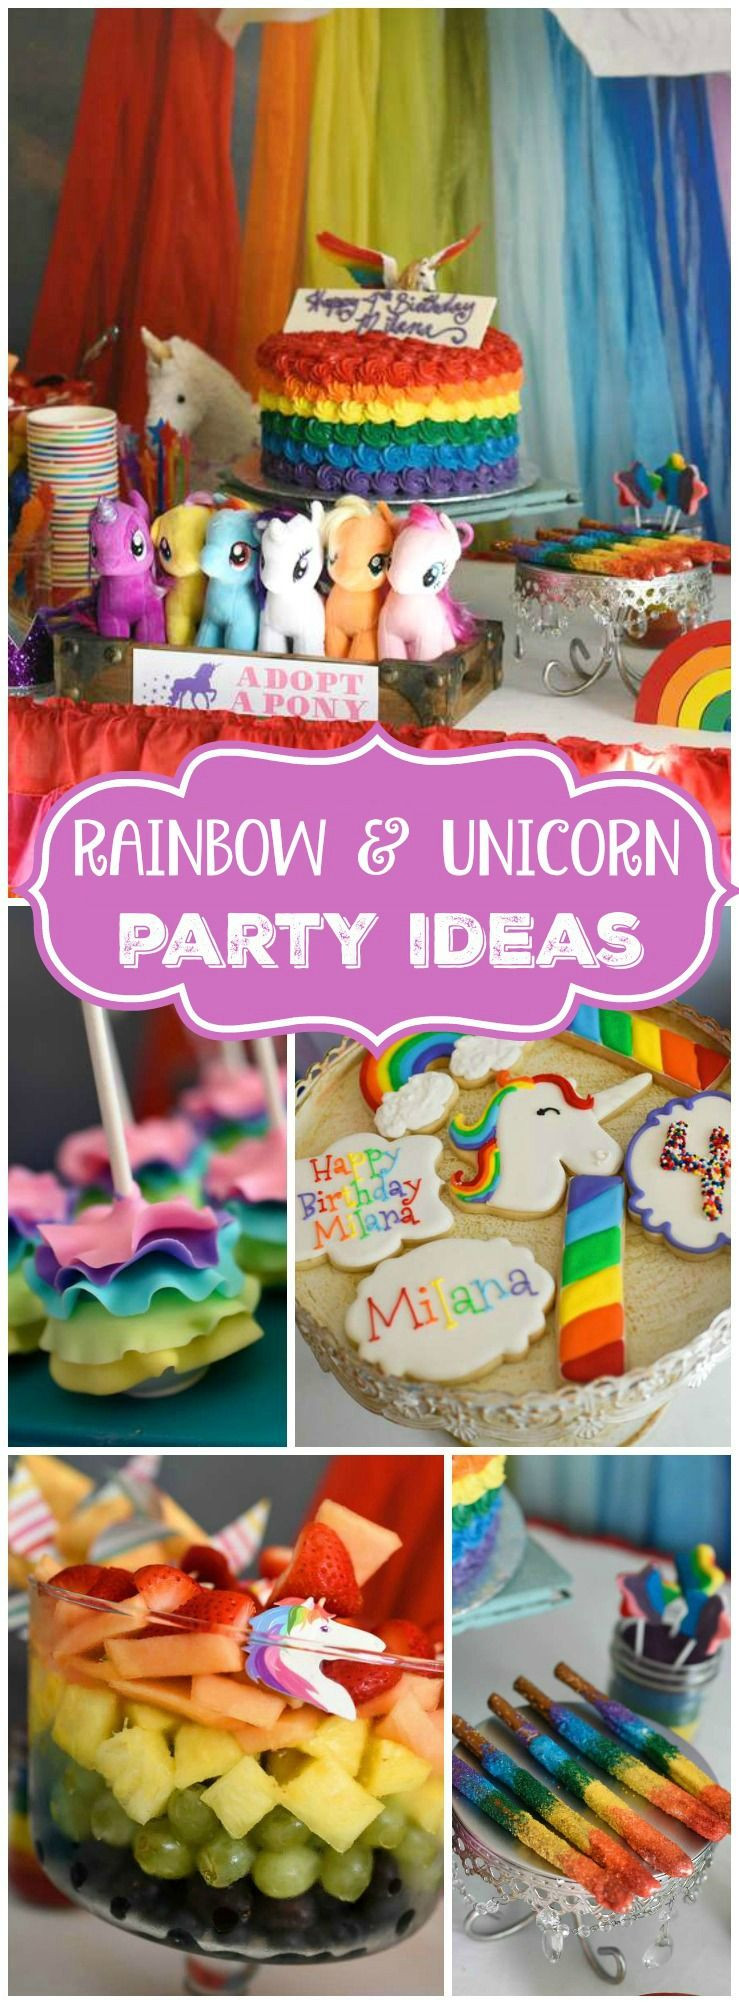 Rainbow And Unicorn Party Ideas
 You must see this unicorns and rainbows birthday party